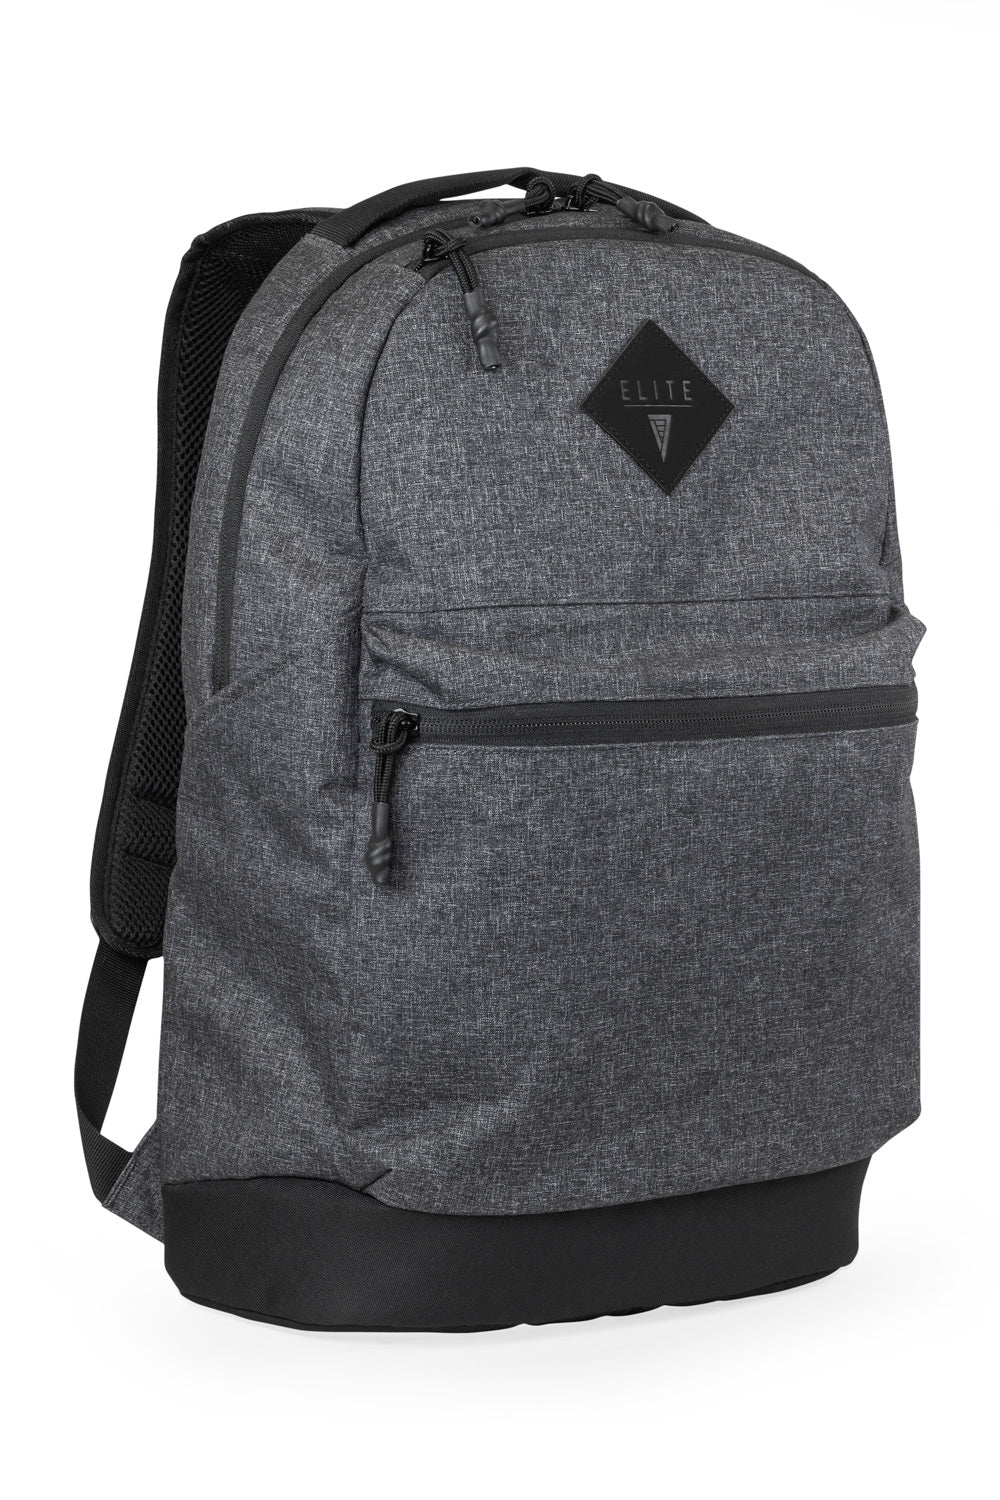 Elite Survival Systems Stealth - Covert Operations Backpack (Gray)